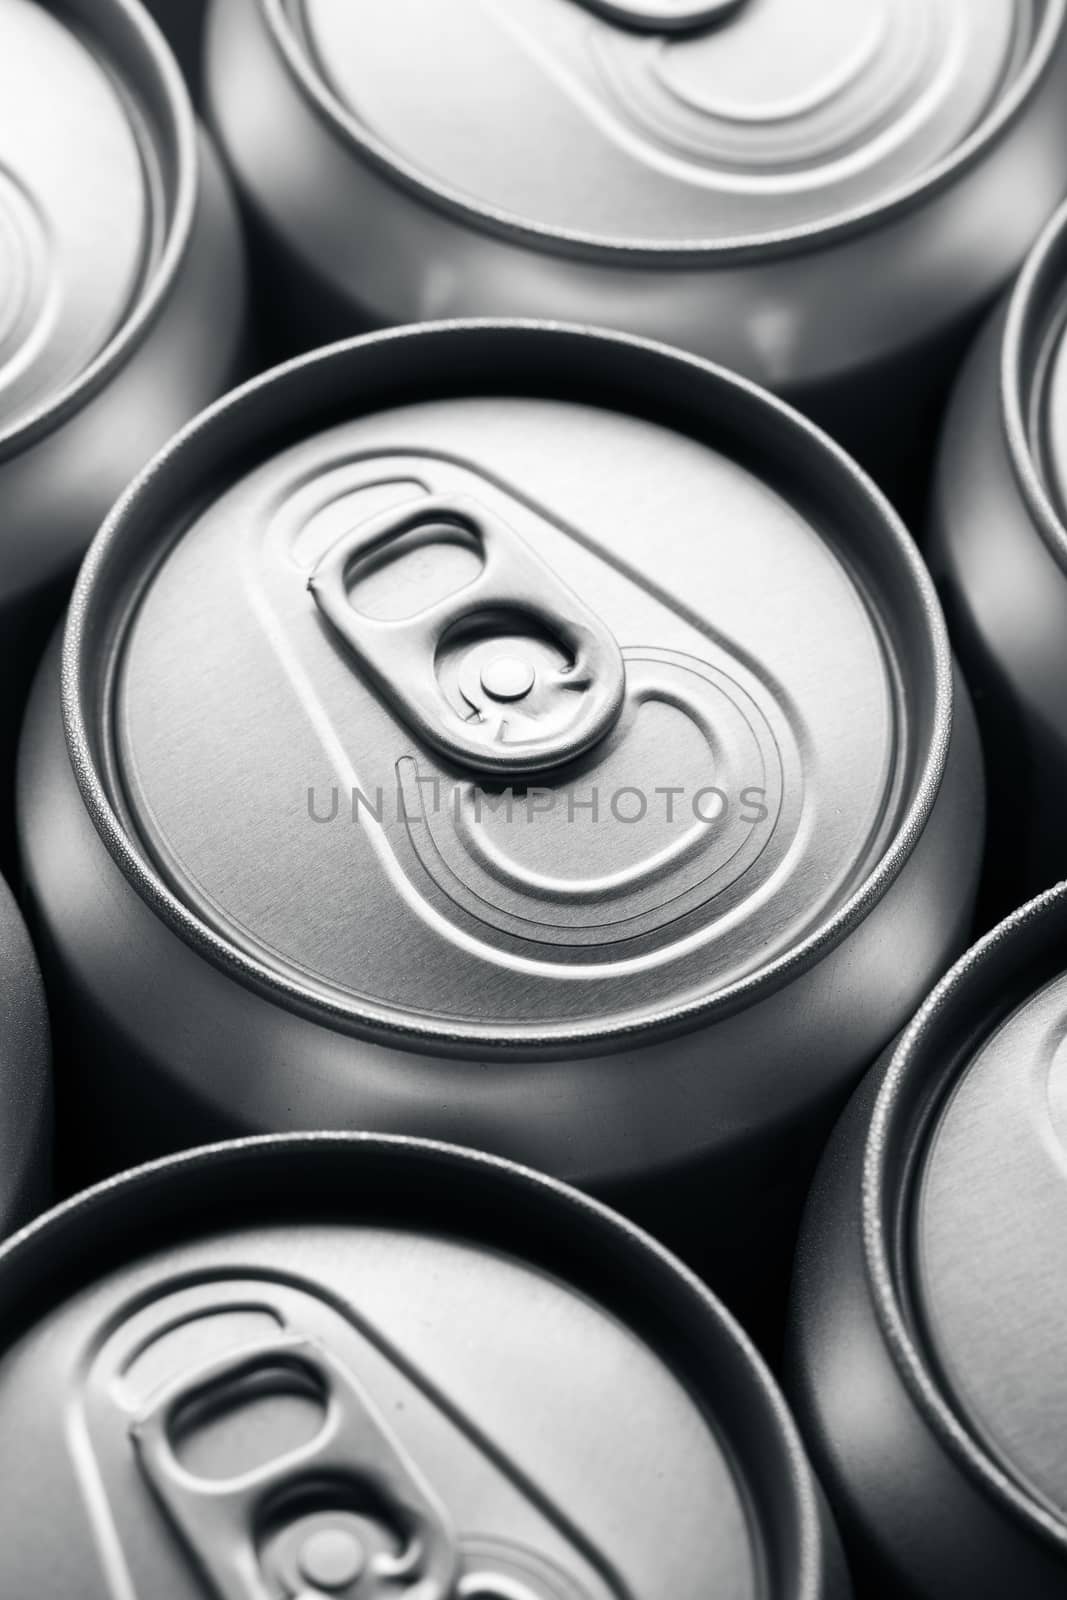 Soda cans